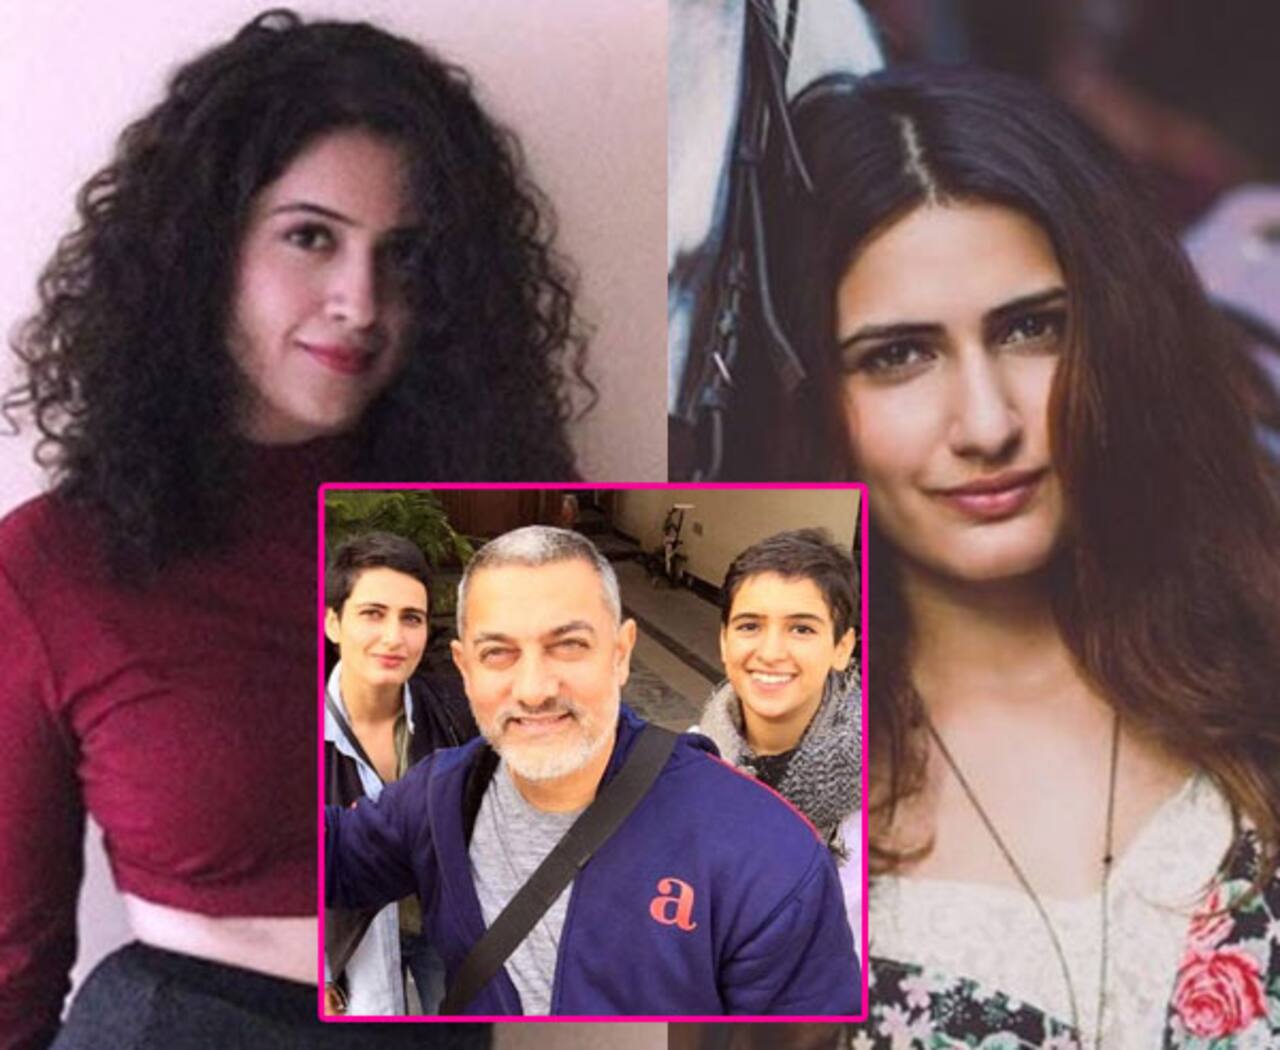 All you need to know about Aamir Khan's wrestler daughters in Dangal - Fatima Shaikh and Sanya Malhotra